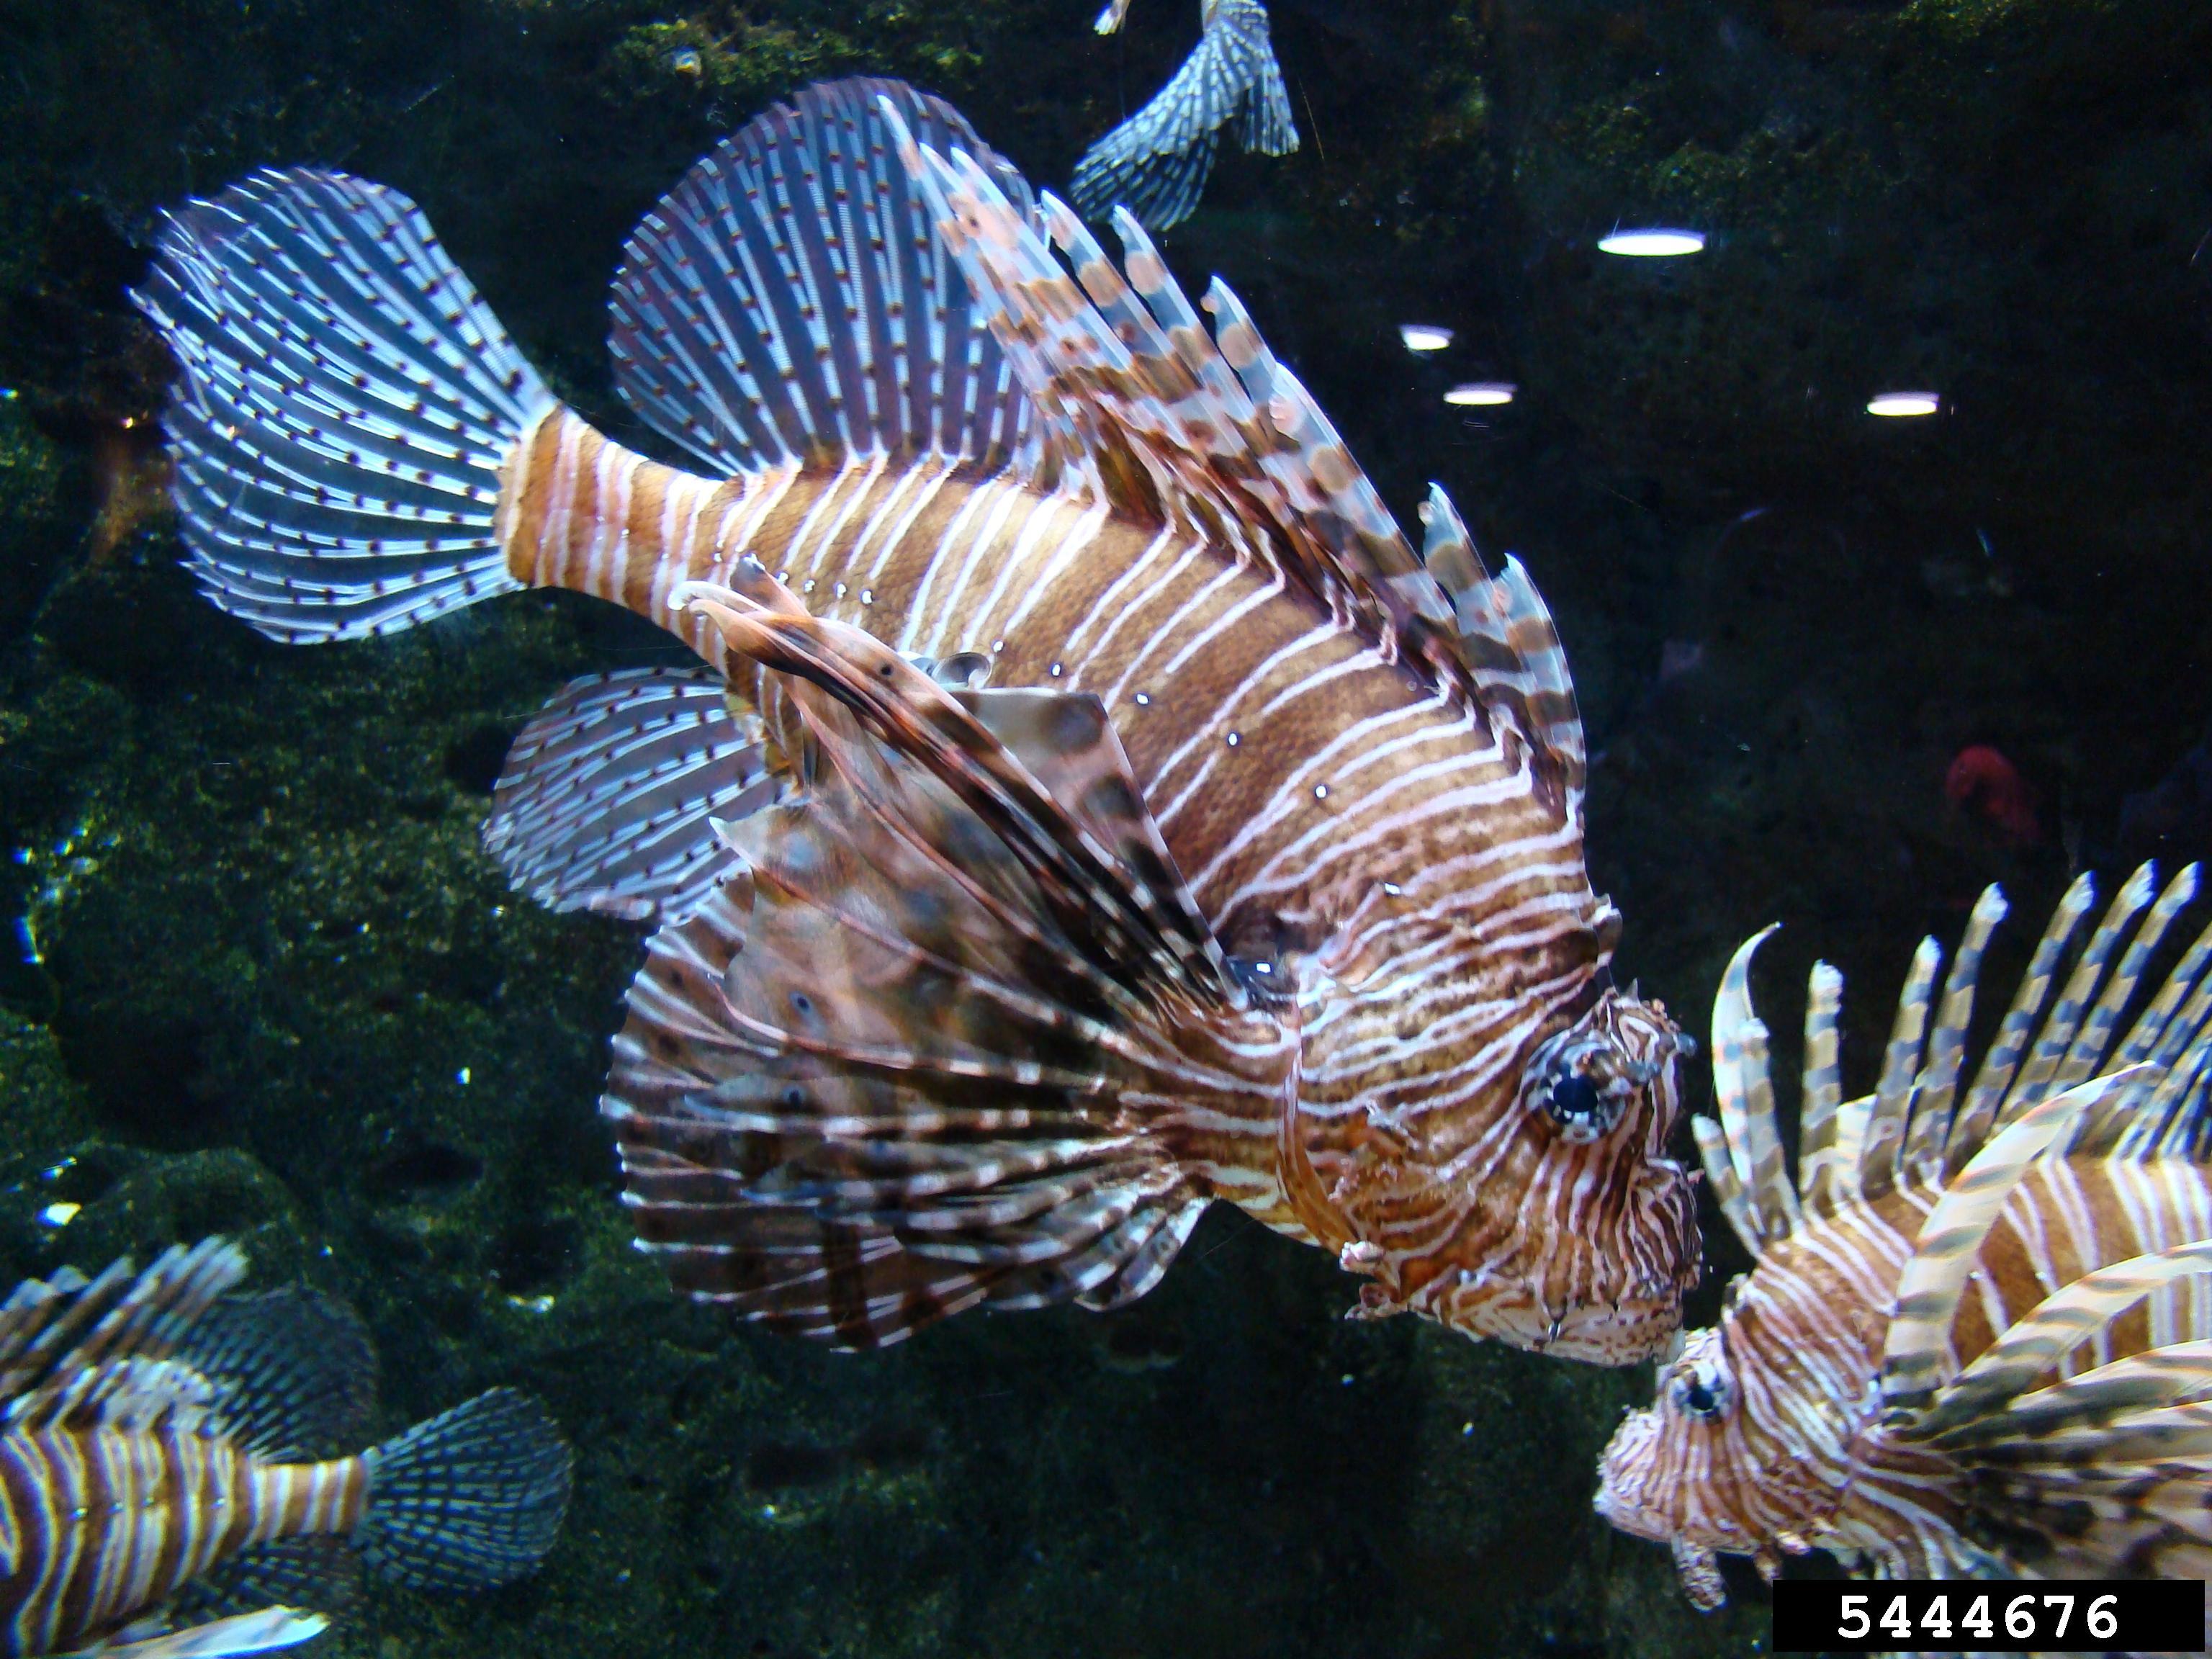 Invasive Species of the Day (February 24): Lionfish and Air Potato